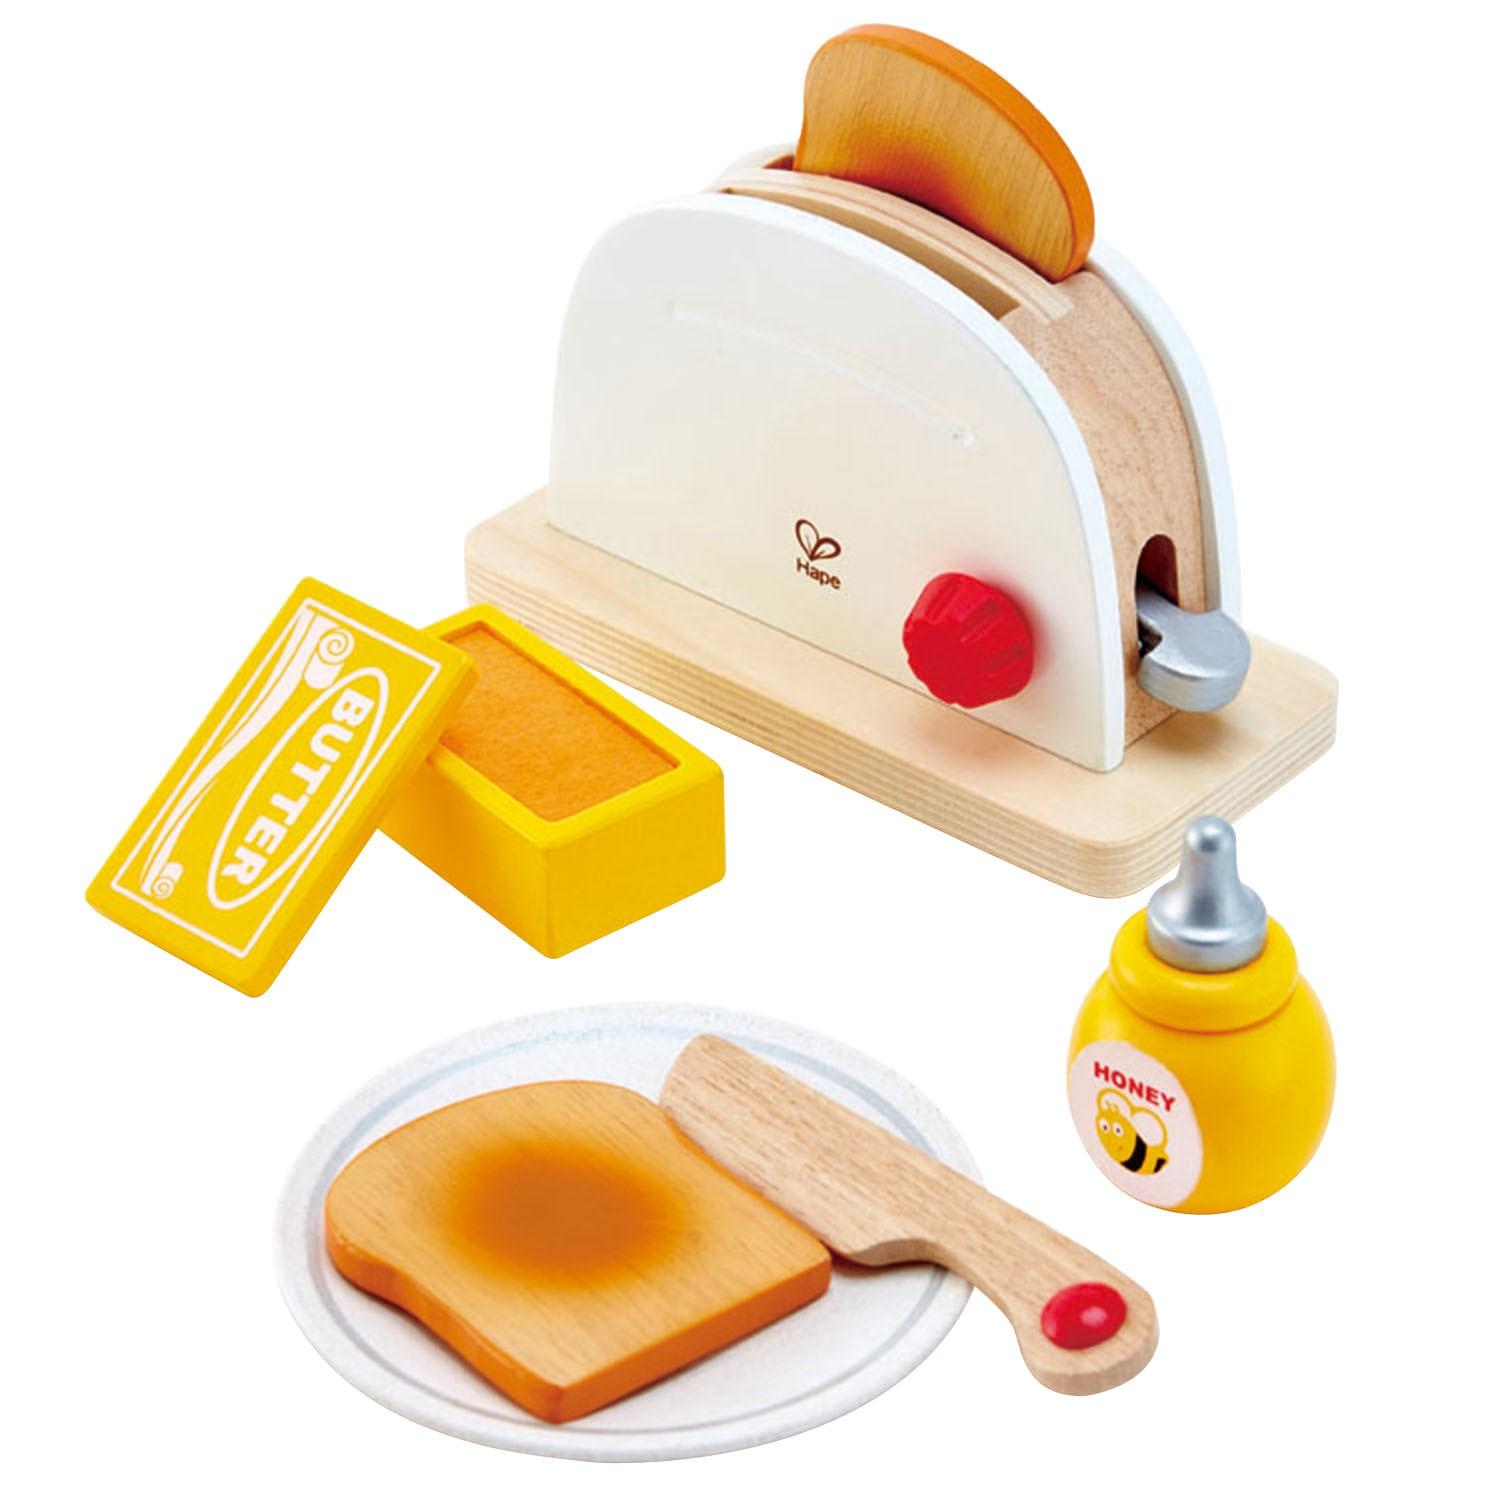 Wooden toaster with 2 slices of toast, plate, honey, butter and knife